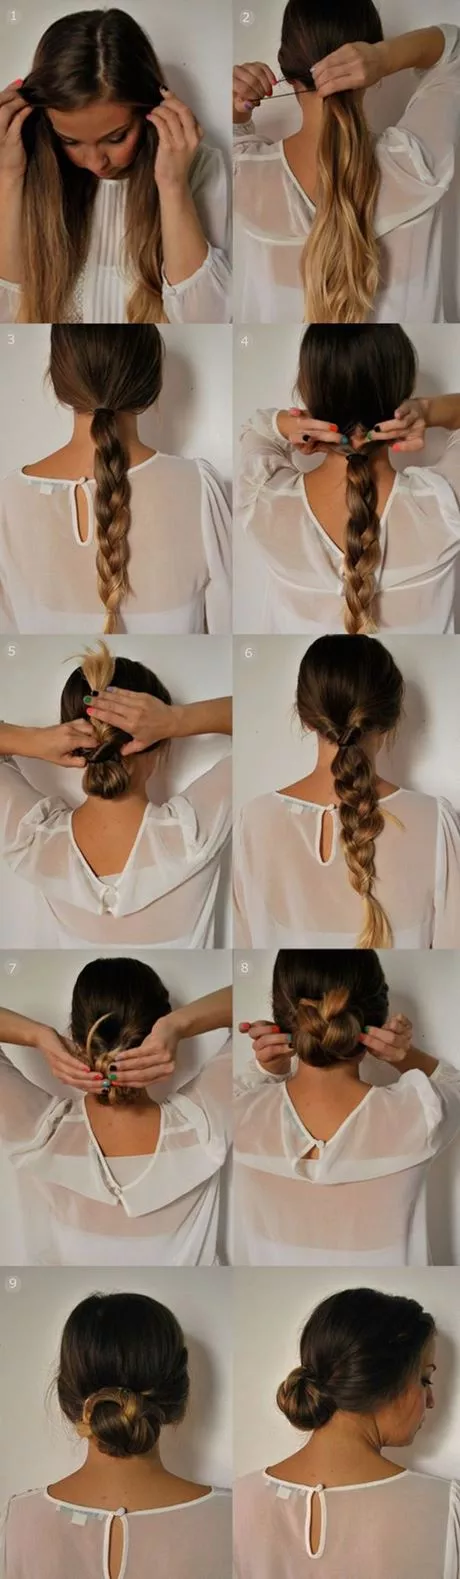 Simple hairstyle at home simple-hairstyle-at-home-44_9-14-14